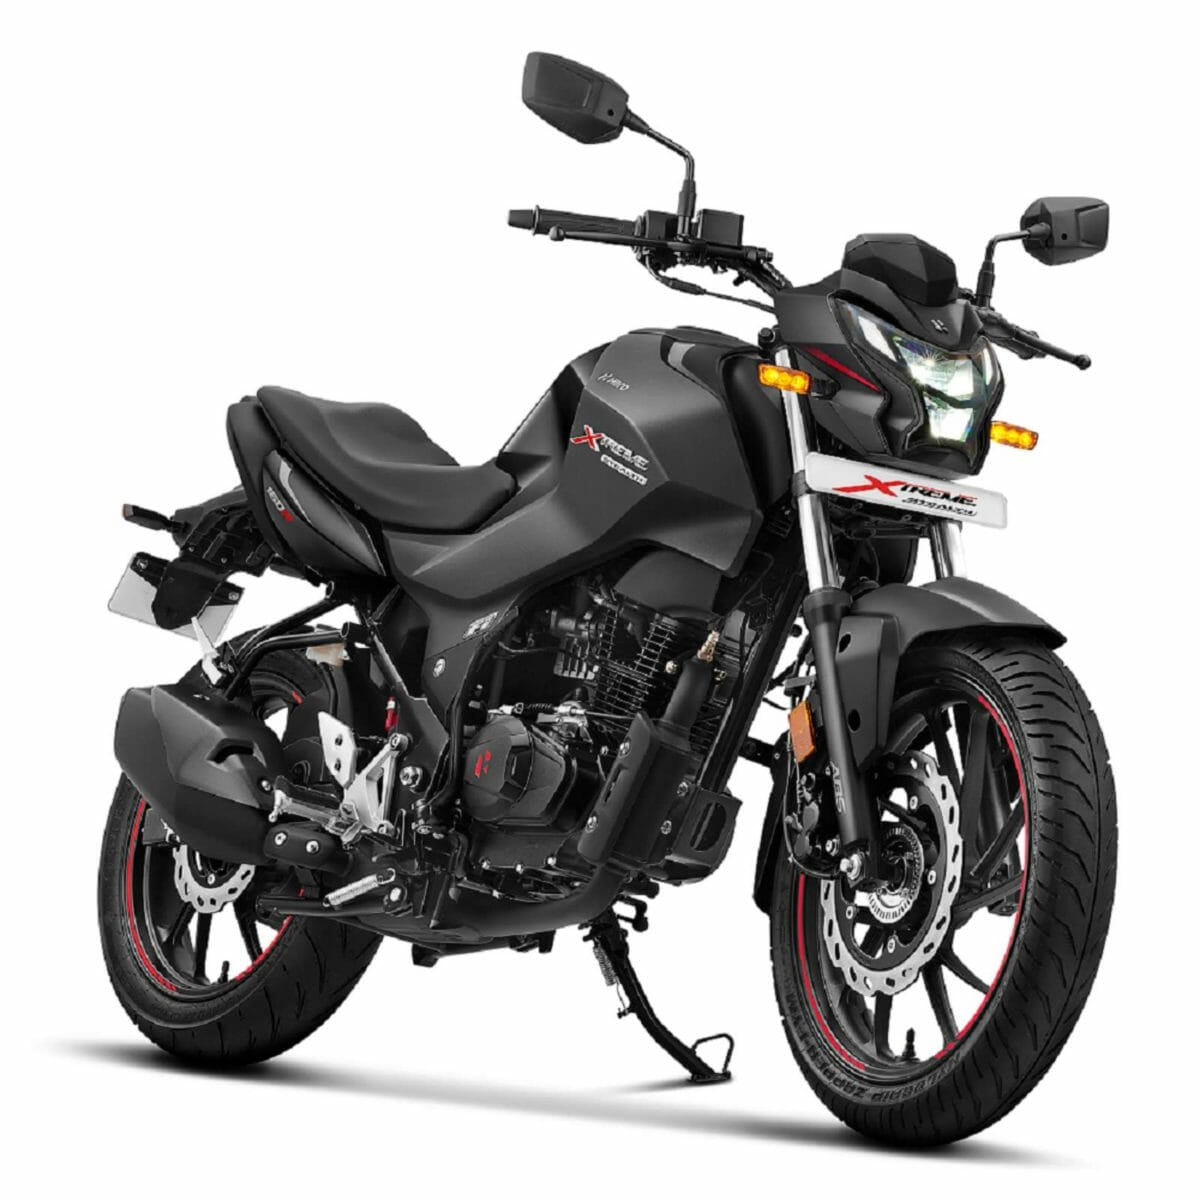 Hero Xtreme 160R Stealth Edition launched